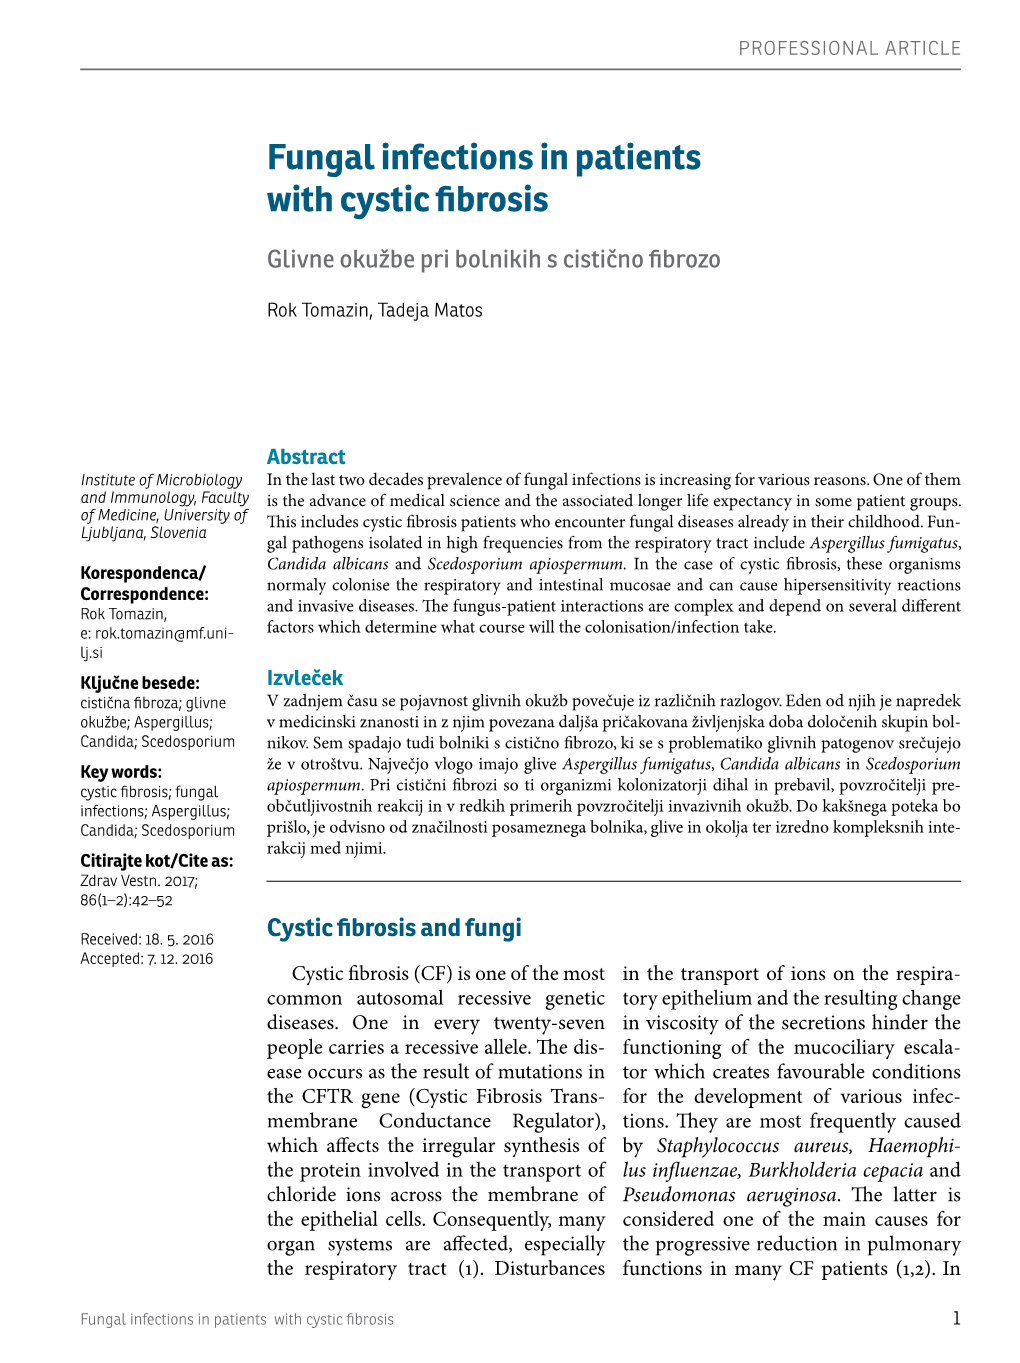 Fungal Infections in Patients with Cystic Fibrosis